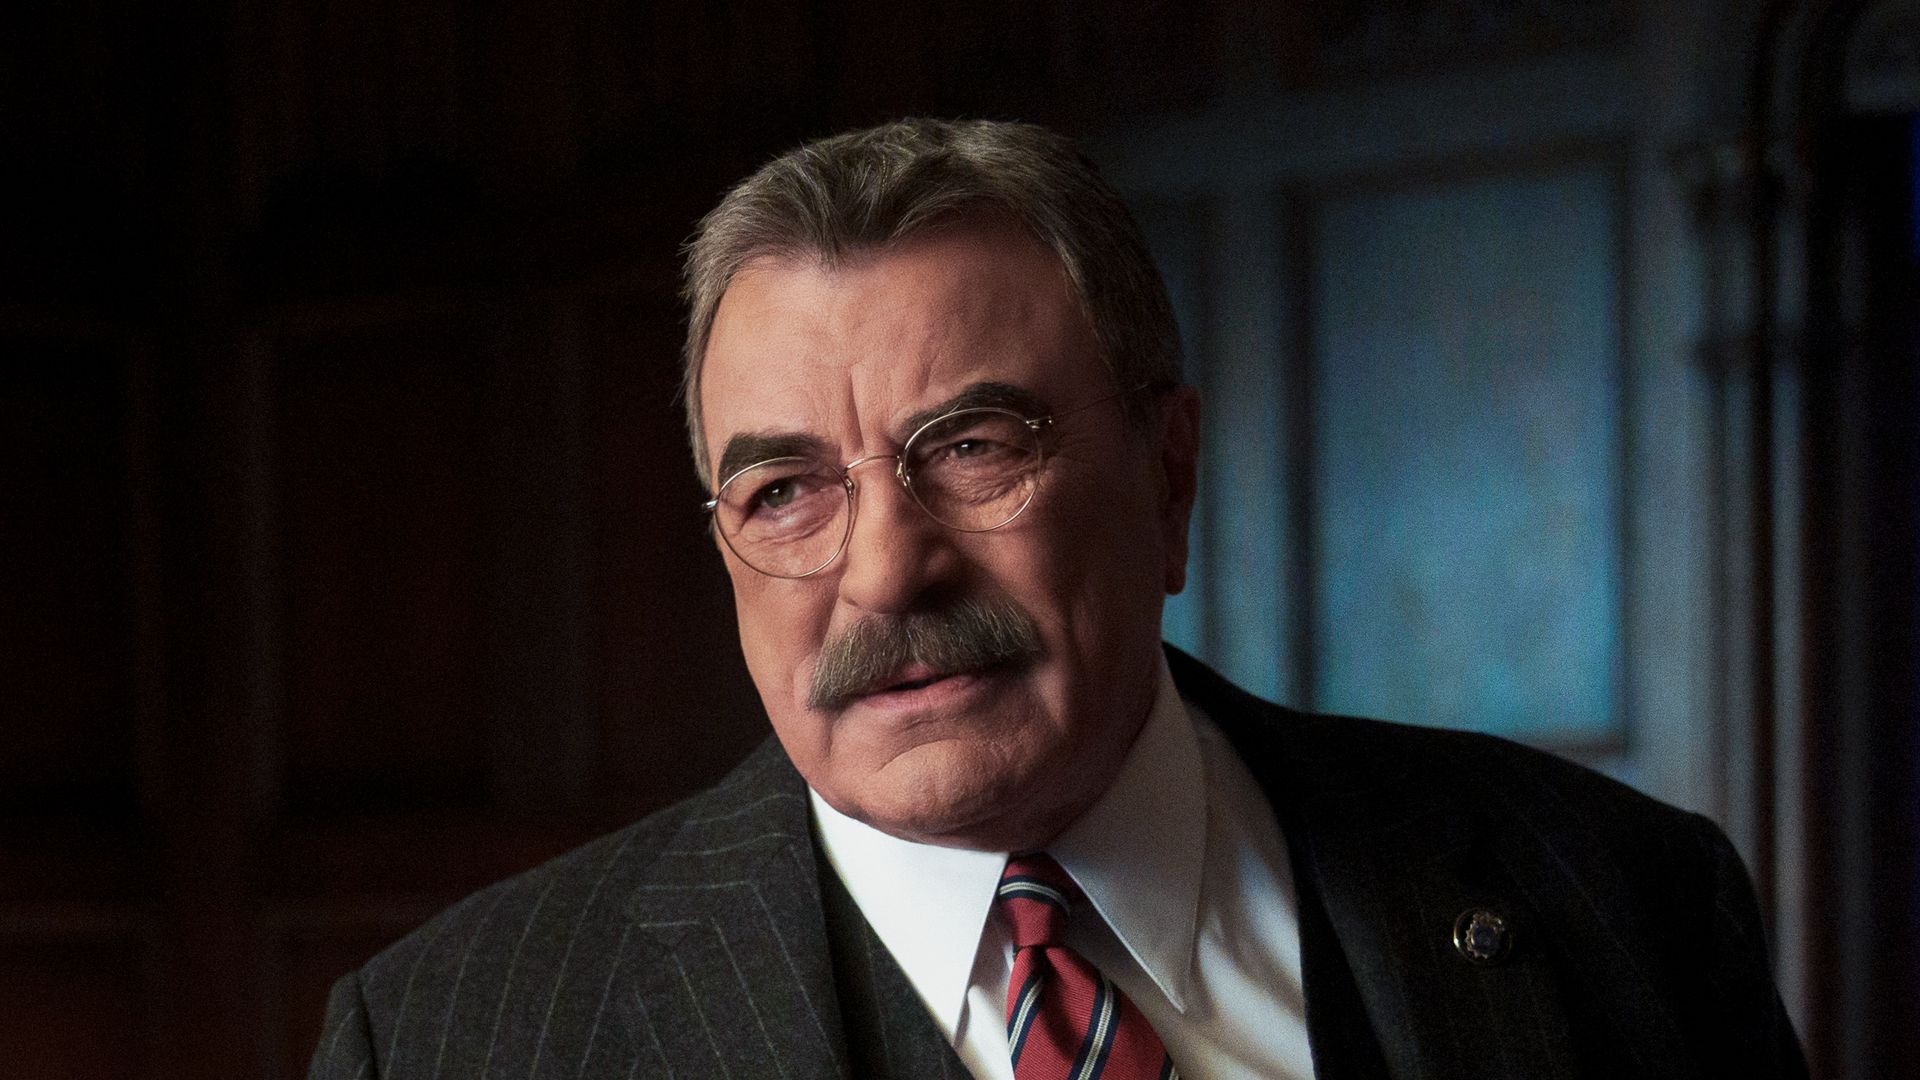 Tom Selleck as Frank Reagan (Photo by Peter Kramer/CBS via Getty Images)